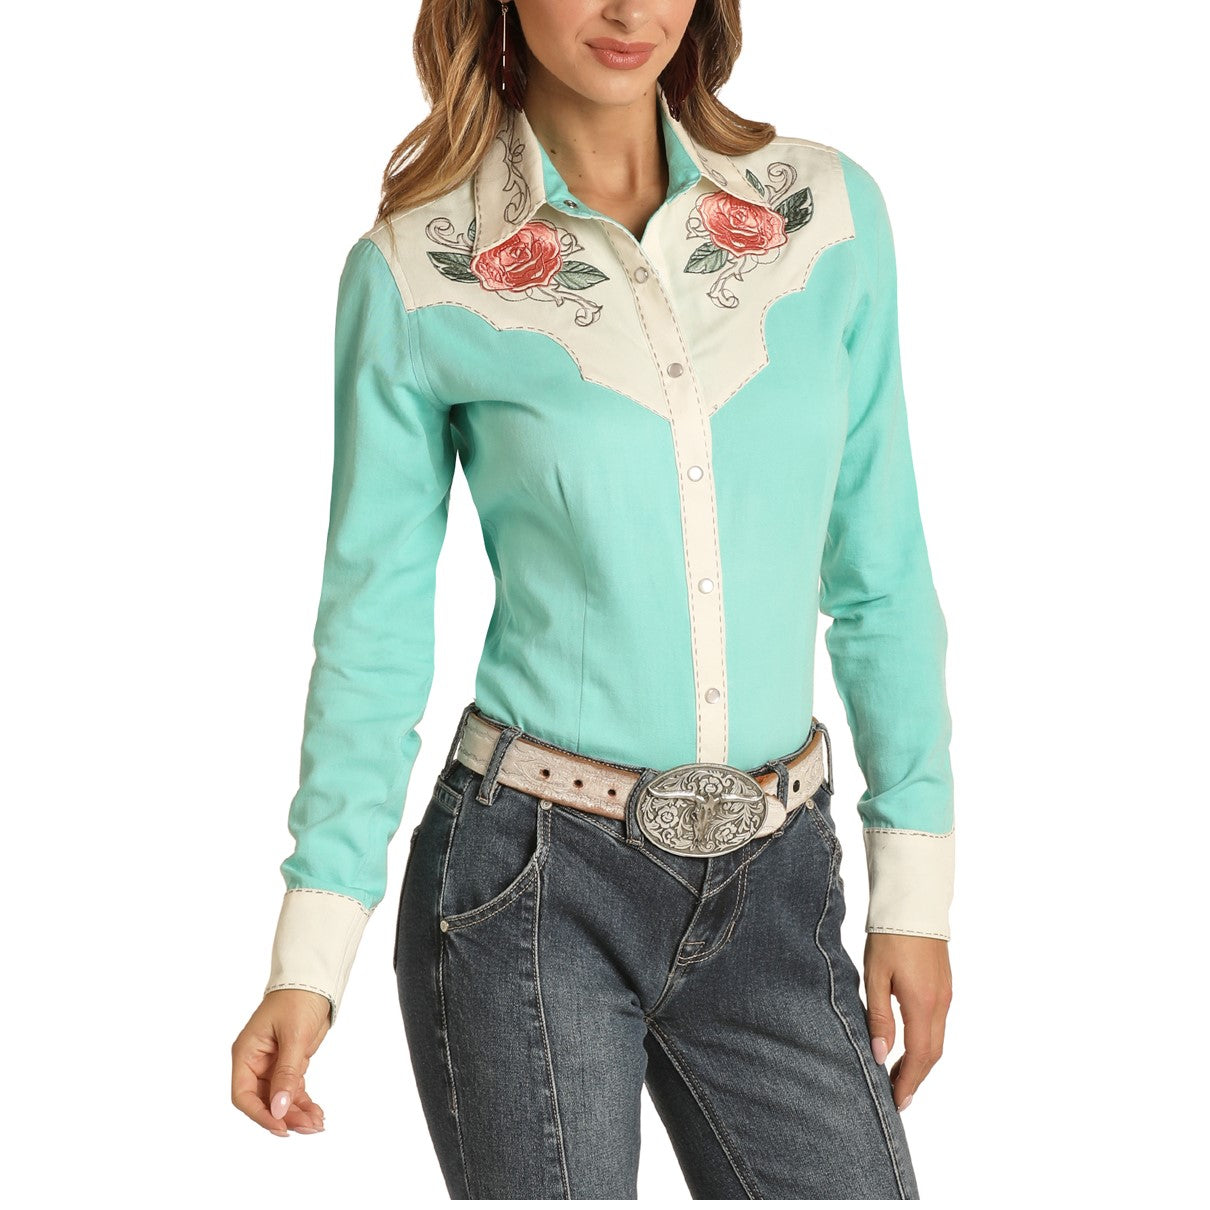 Rock & Roll Cowgirl Ladies Turquoise Snap Shirt B4S8419